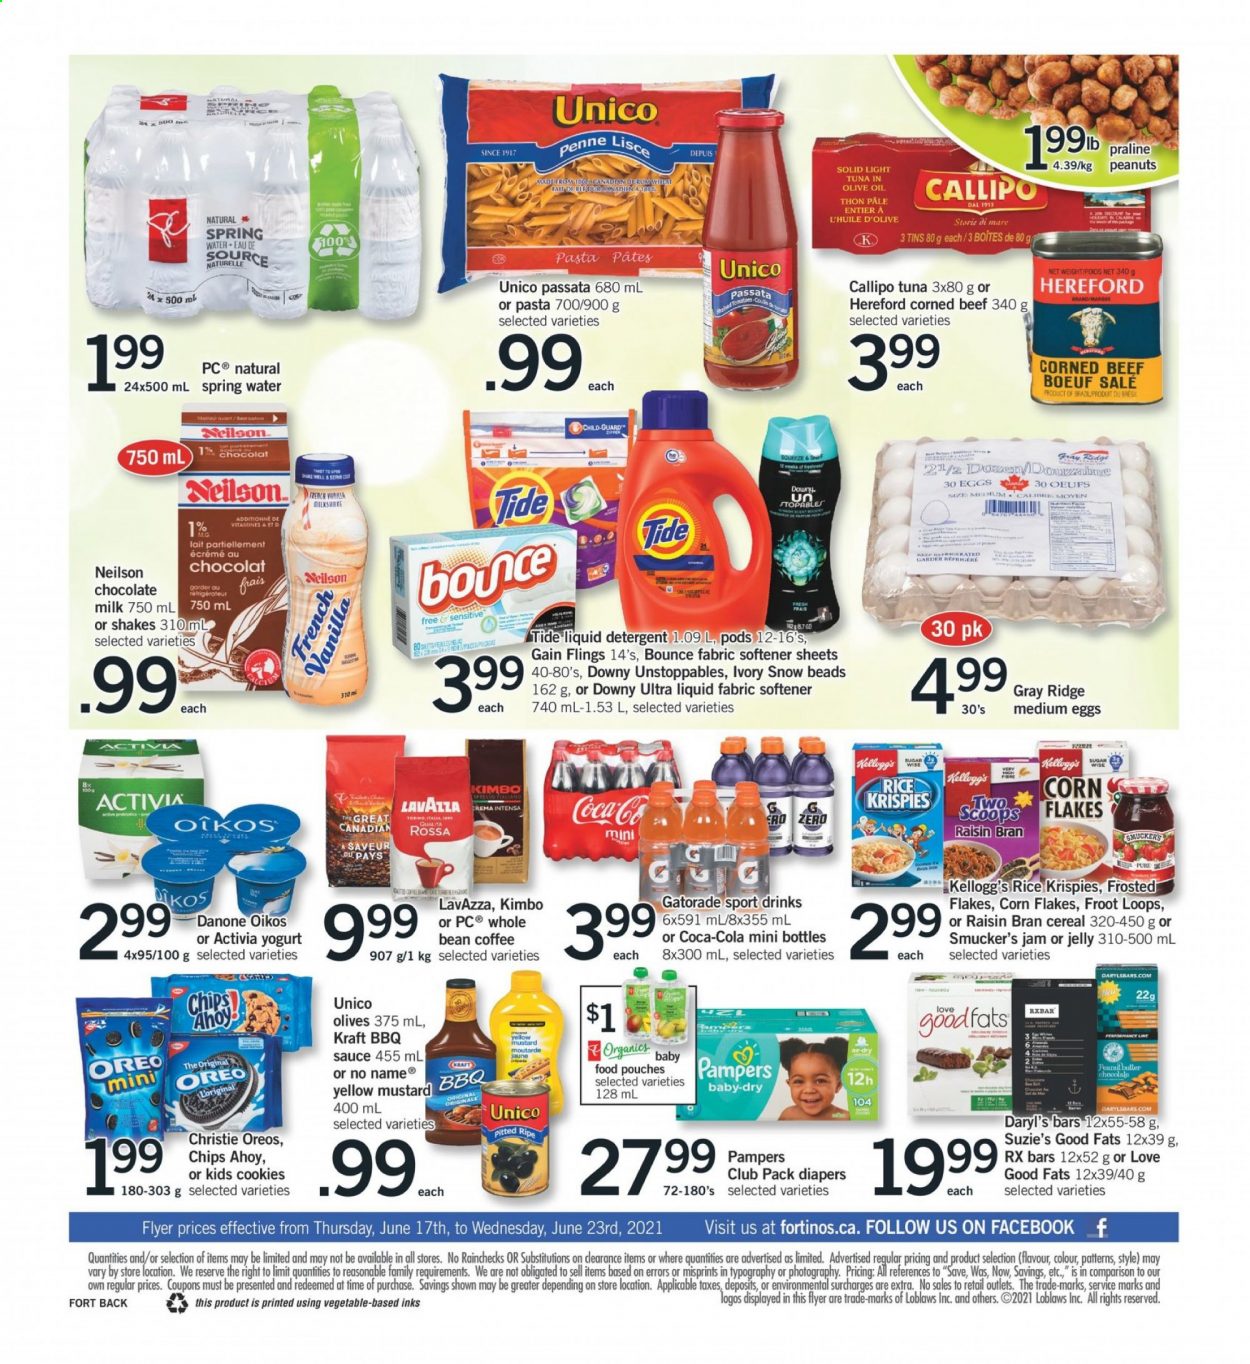 thumbnail - Fortinos Flyer - June 17, 2021 - June 23, 2021 - Sales products - tuna, No Name, sauce, Kraft®, corned beef, Oreo, yoghurt, Activia, Oikos, milkshake, shake, eggs, butter, cookies, chocolate, jelly, Kellogg's, sugar, cereals, corn flakes, Rice Krispies, Frosted Flakes, Raisin Bran, penne, mustard, olive oil, oil, fruit jam, peanuts, Coca-Cola, Gatorade, spring water, coffee, Lavazza, beef meat, nappies, Gain, Tide, fabric softener, liquid detergent, Bounce, Downy Laundry, Danone, Pampers, olives, chips. Page 2.